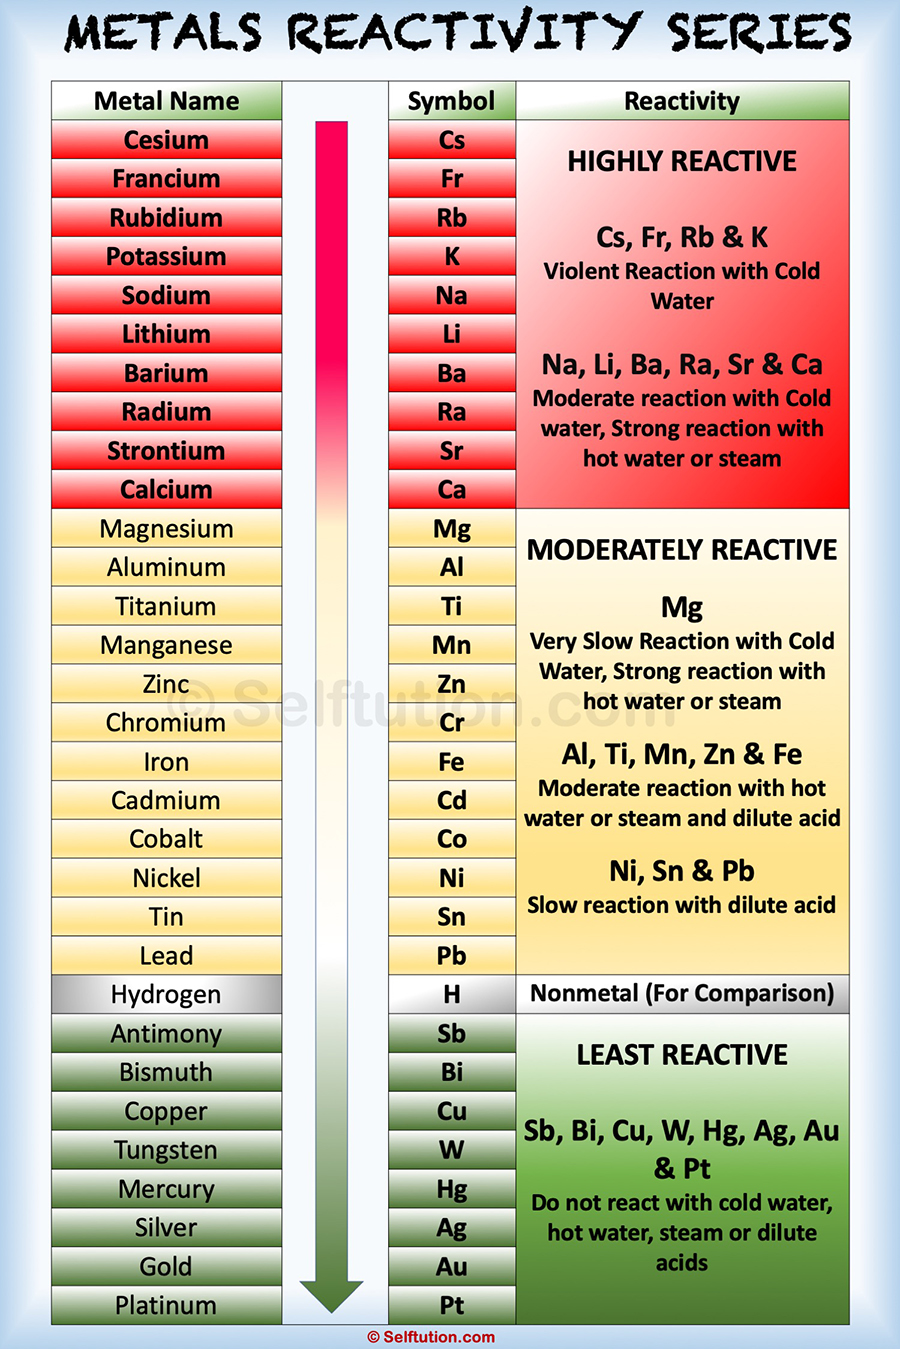 Complete Reactivity Series of Metals with all 31 elements out of which 30 metals are there and one nonmetal hydrogen is included for comparison purpose. Hydrogen is included in reactivity series of metals because it also loses electrons like metal to form positive ions.